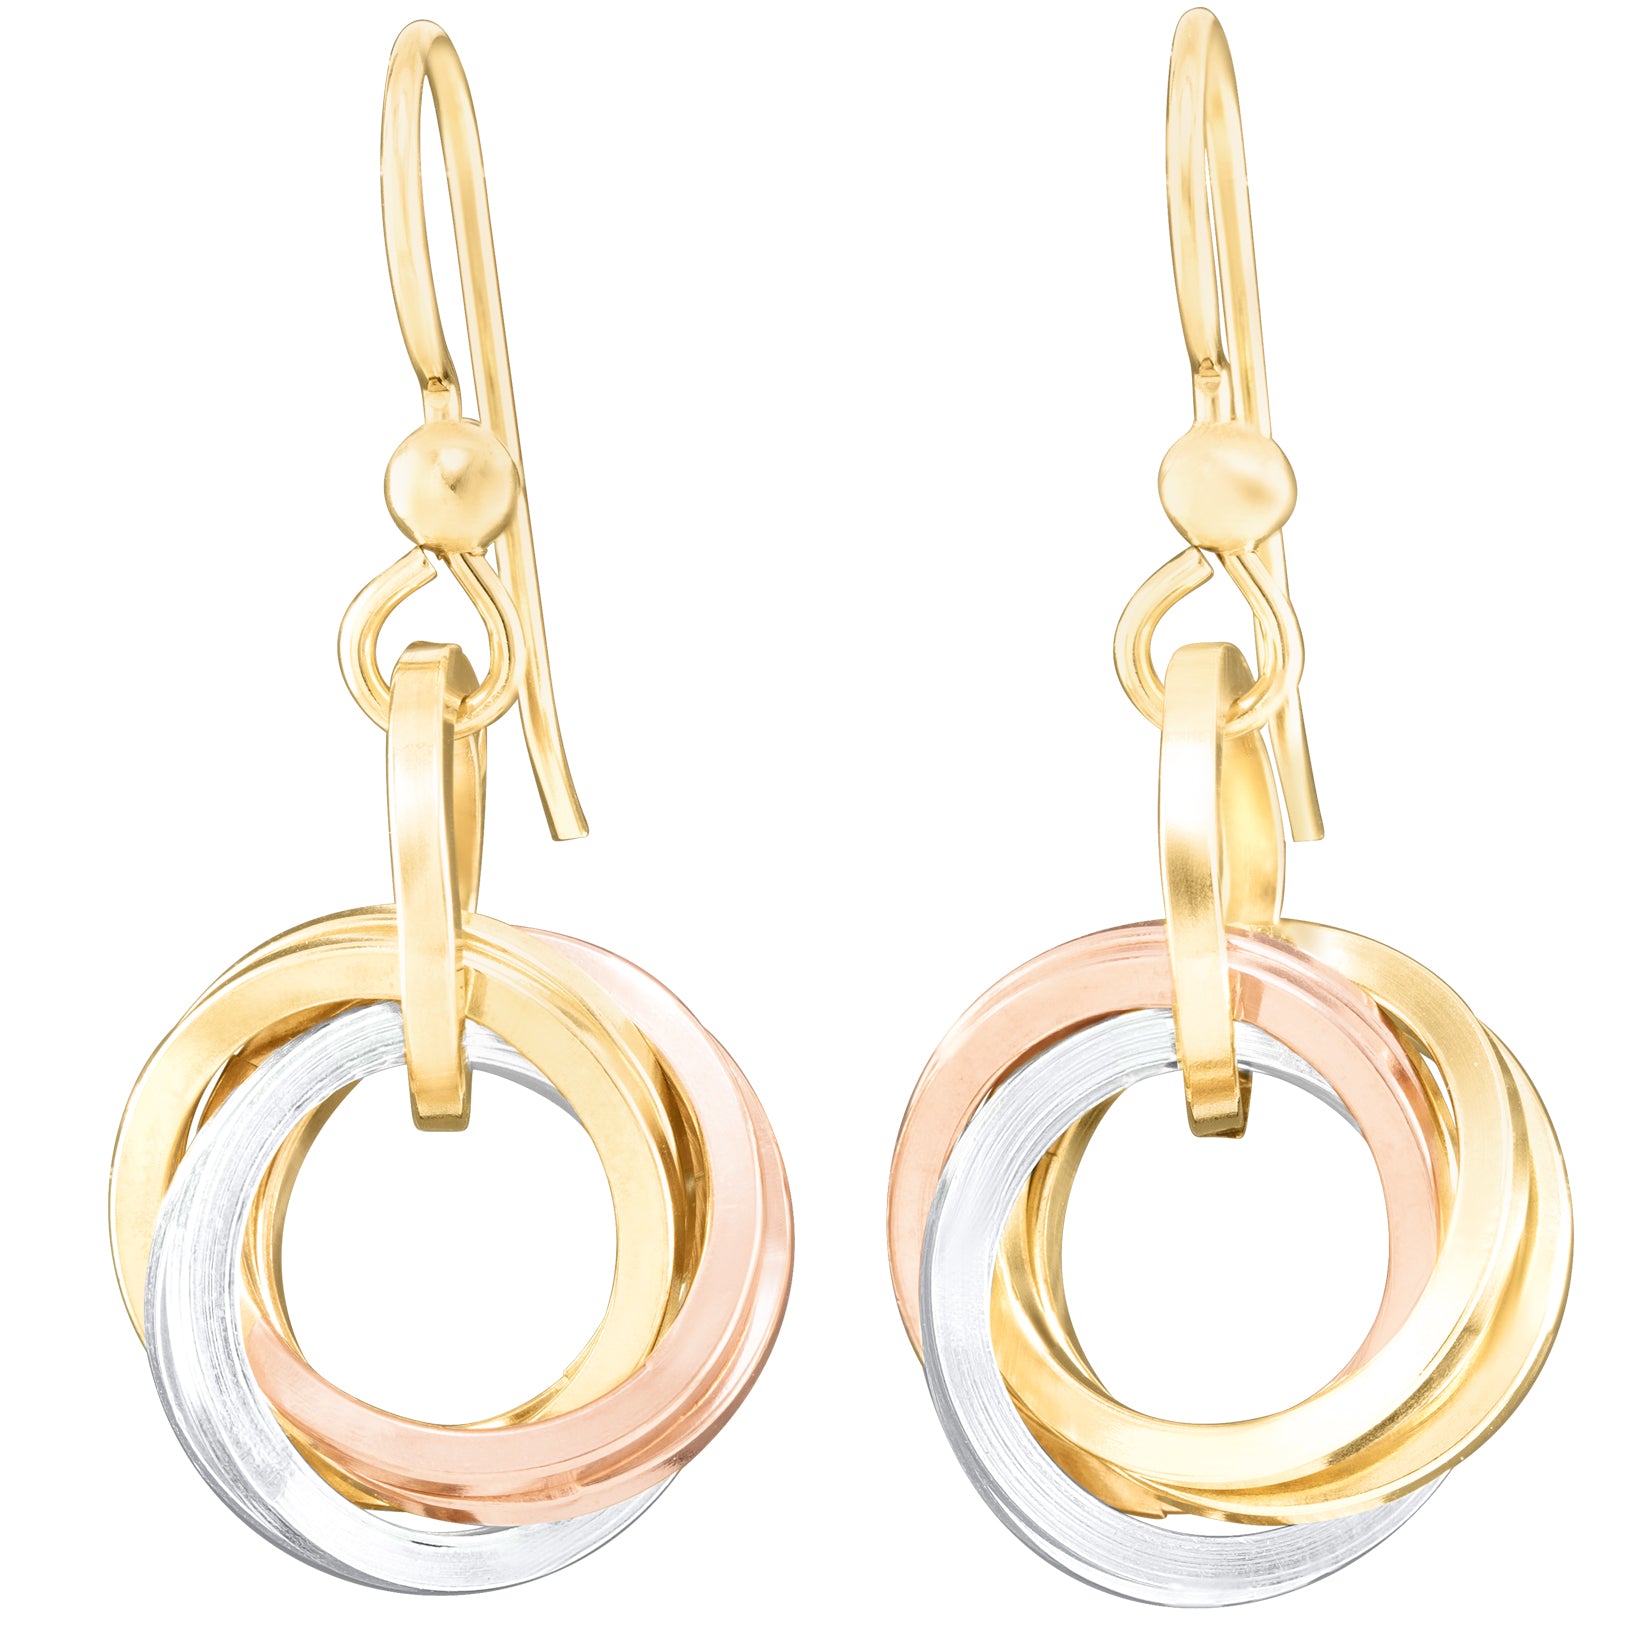 AS SEEN ON Amazon's New Dogs, Old Tricks - Tri Color Love Knot Dangle Earrings